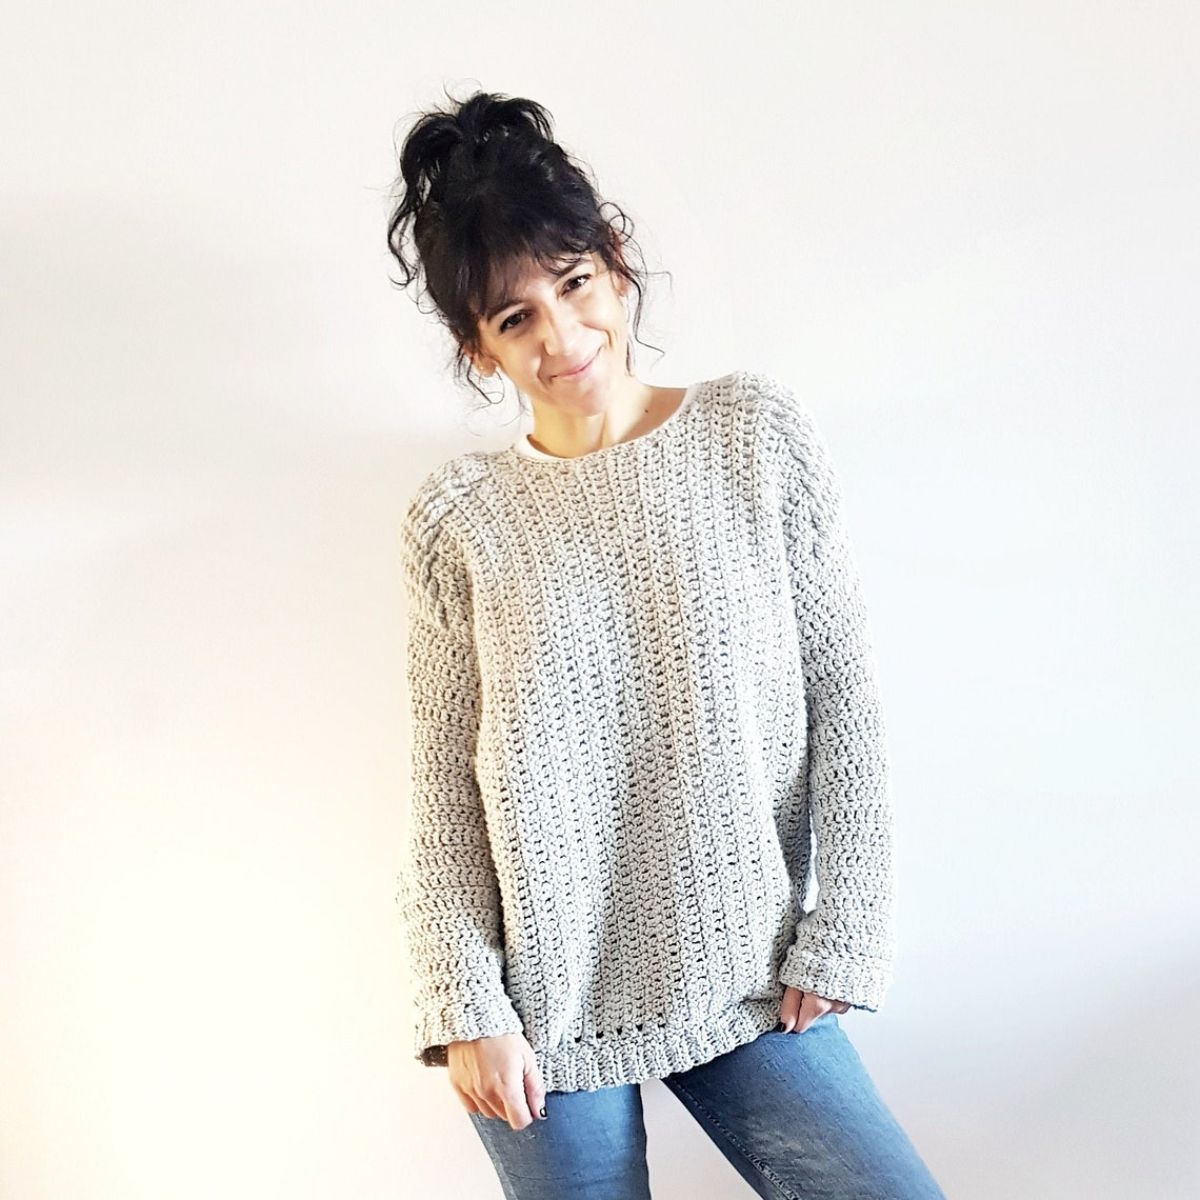 Smiling brunette woman in a long sleeved light gray crochet jumper with a chunky trim on the bottom against a white background.